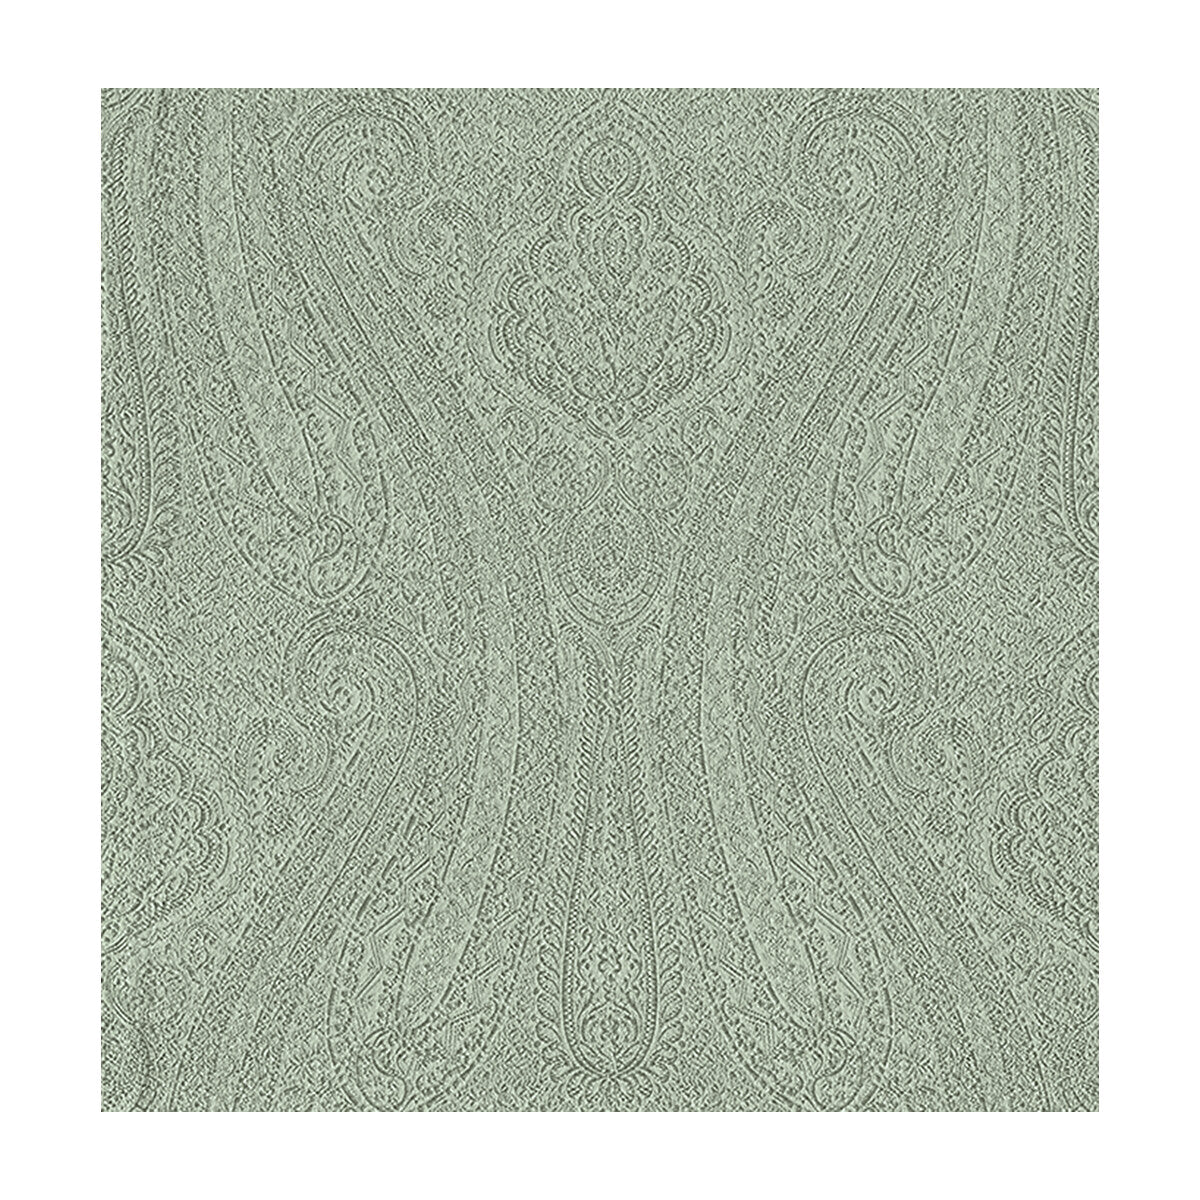 Livia fabric in mineral color - pattern 34127.1516.0 - by Kravet Design in the Candice Olson collection